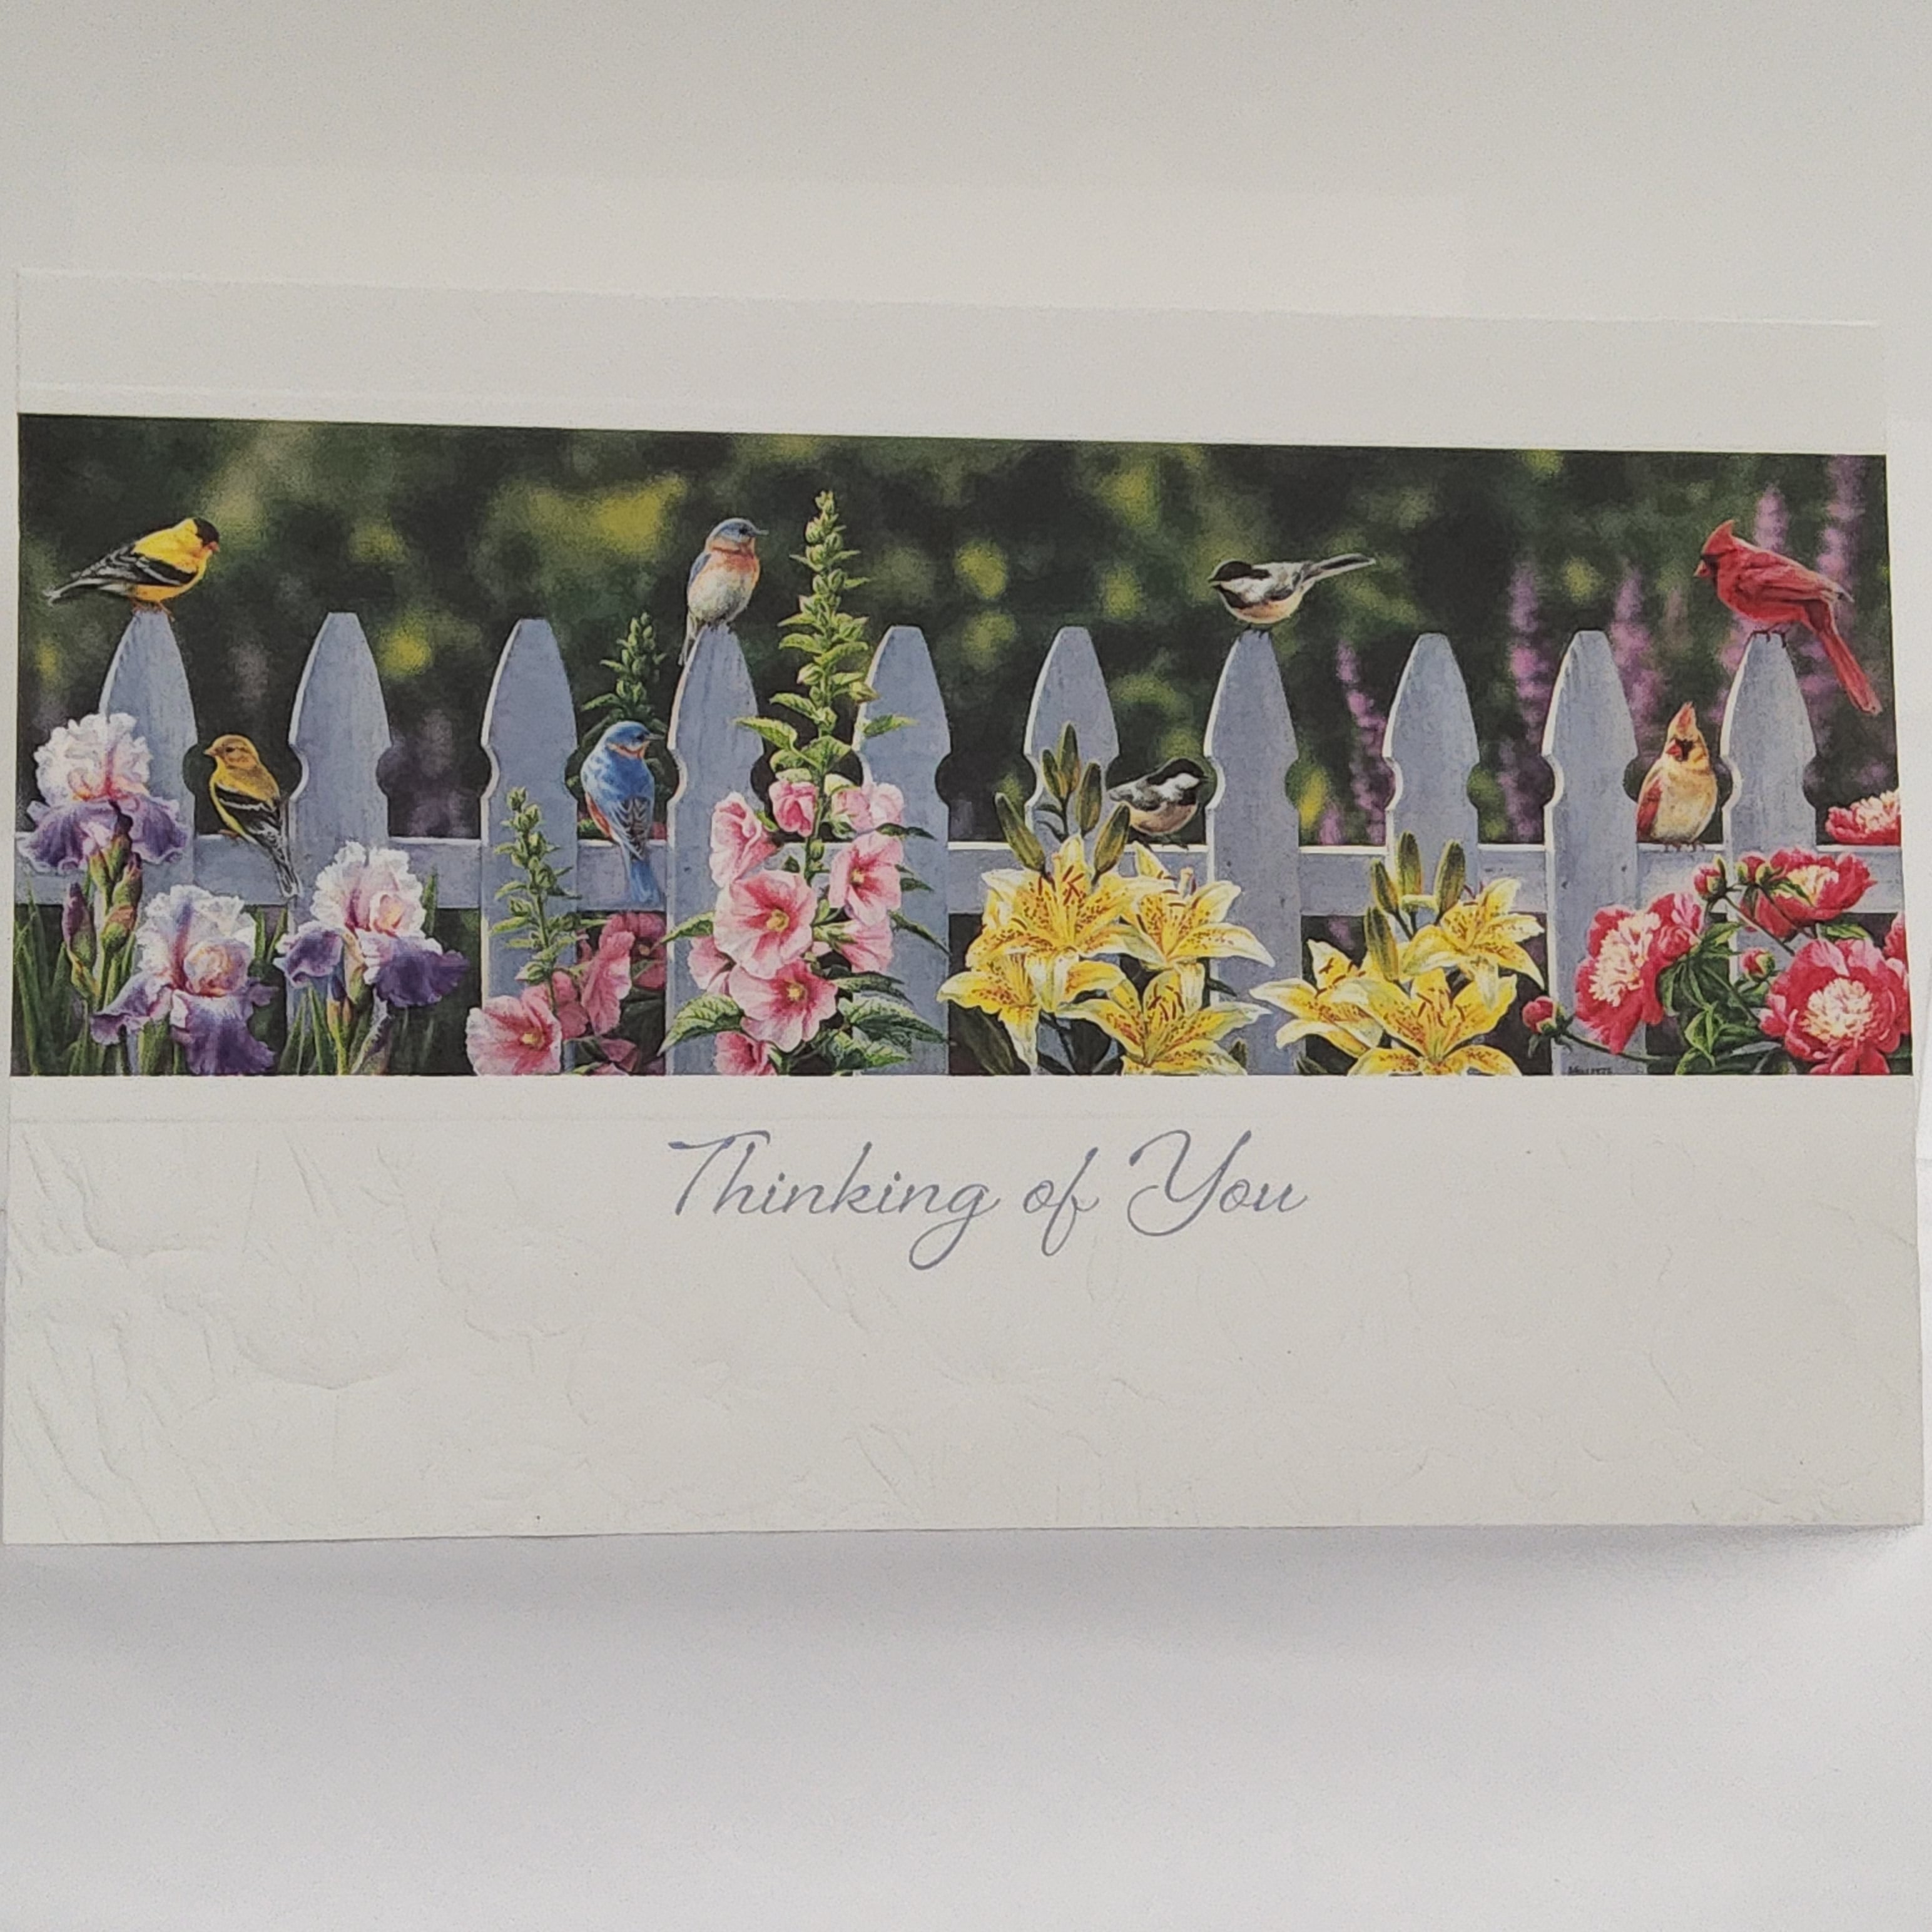 Greeting Card - Thinking of You - Songbirds on Fence - Pumpernickel Press - 50683